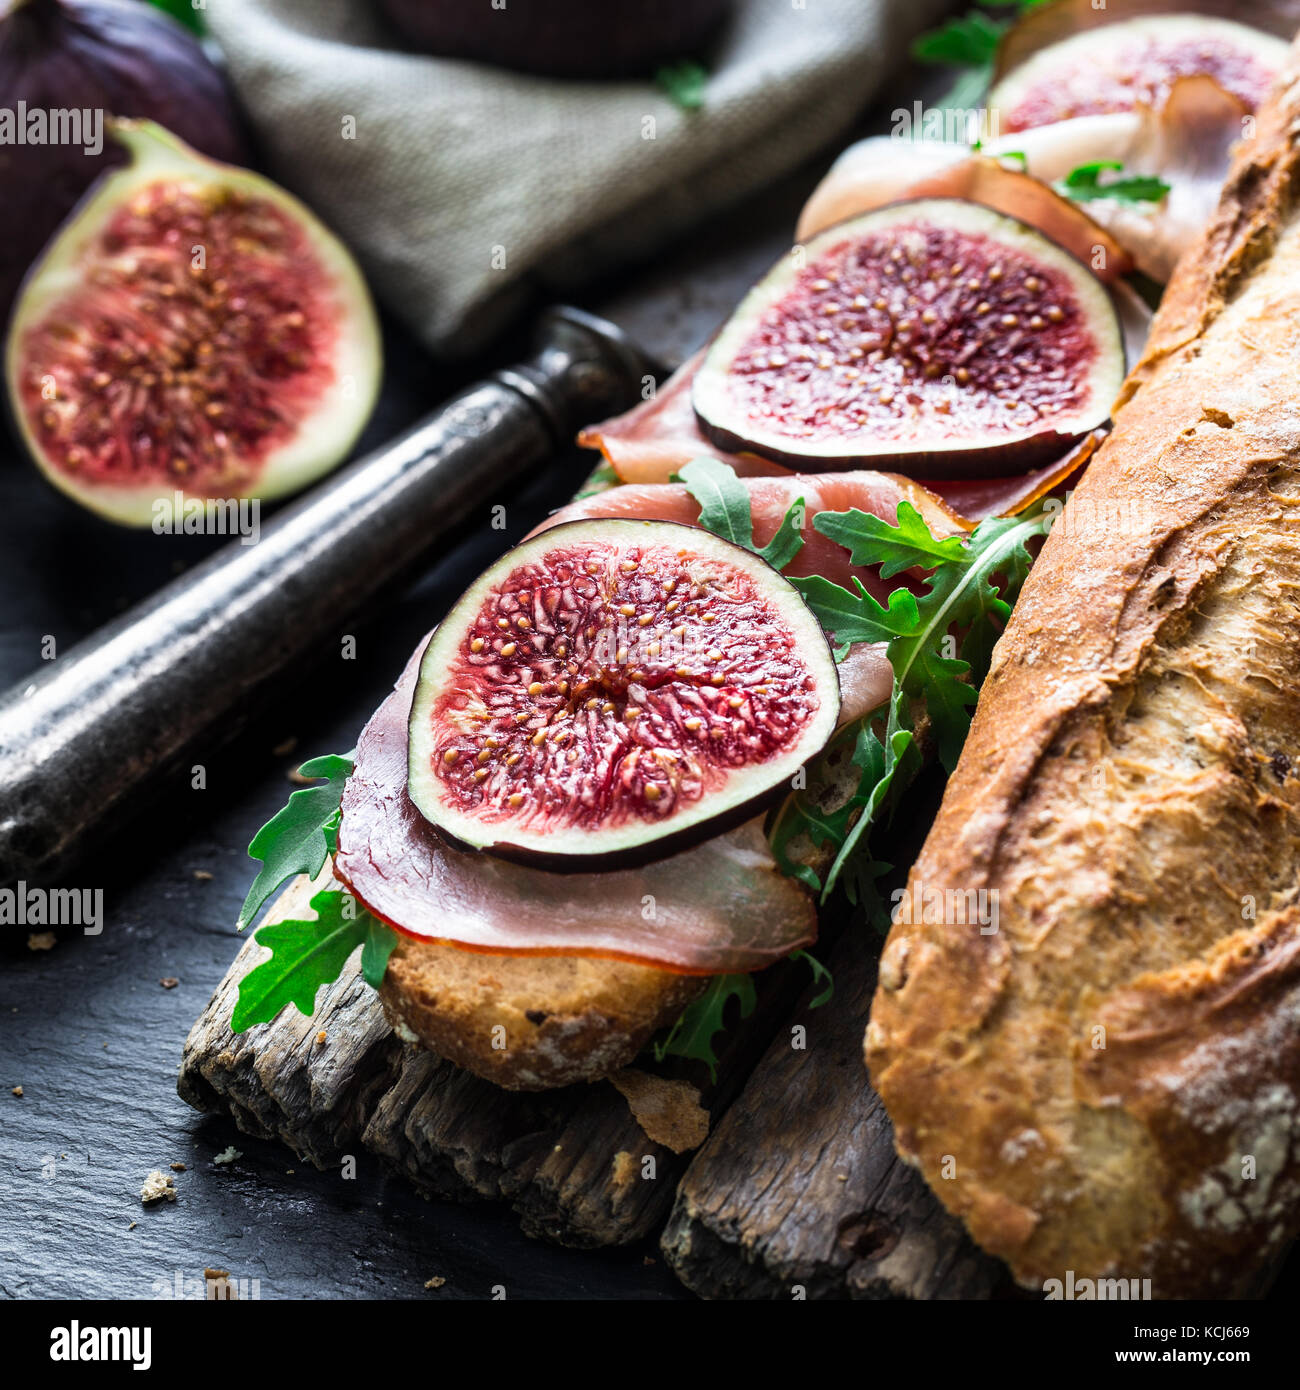 Sandwich with figs and prosciutto Stock Photo